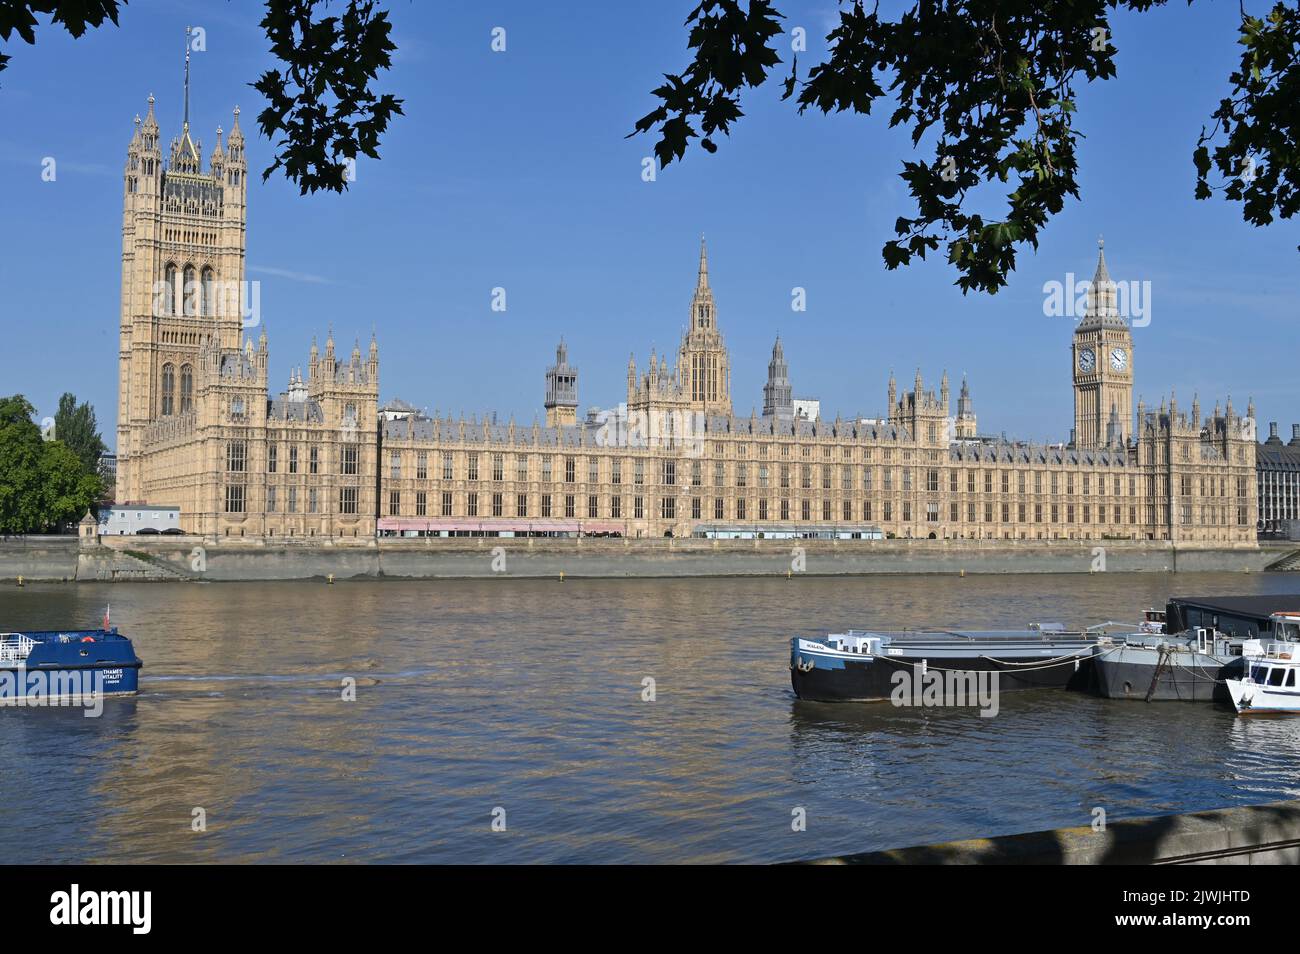 The Palace of Westminster on the north bank of the river Thames in London is the seat of the UK's government. Stock Photo